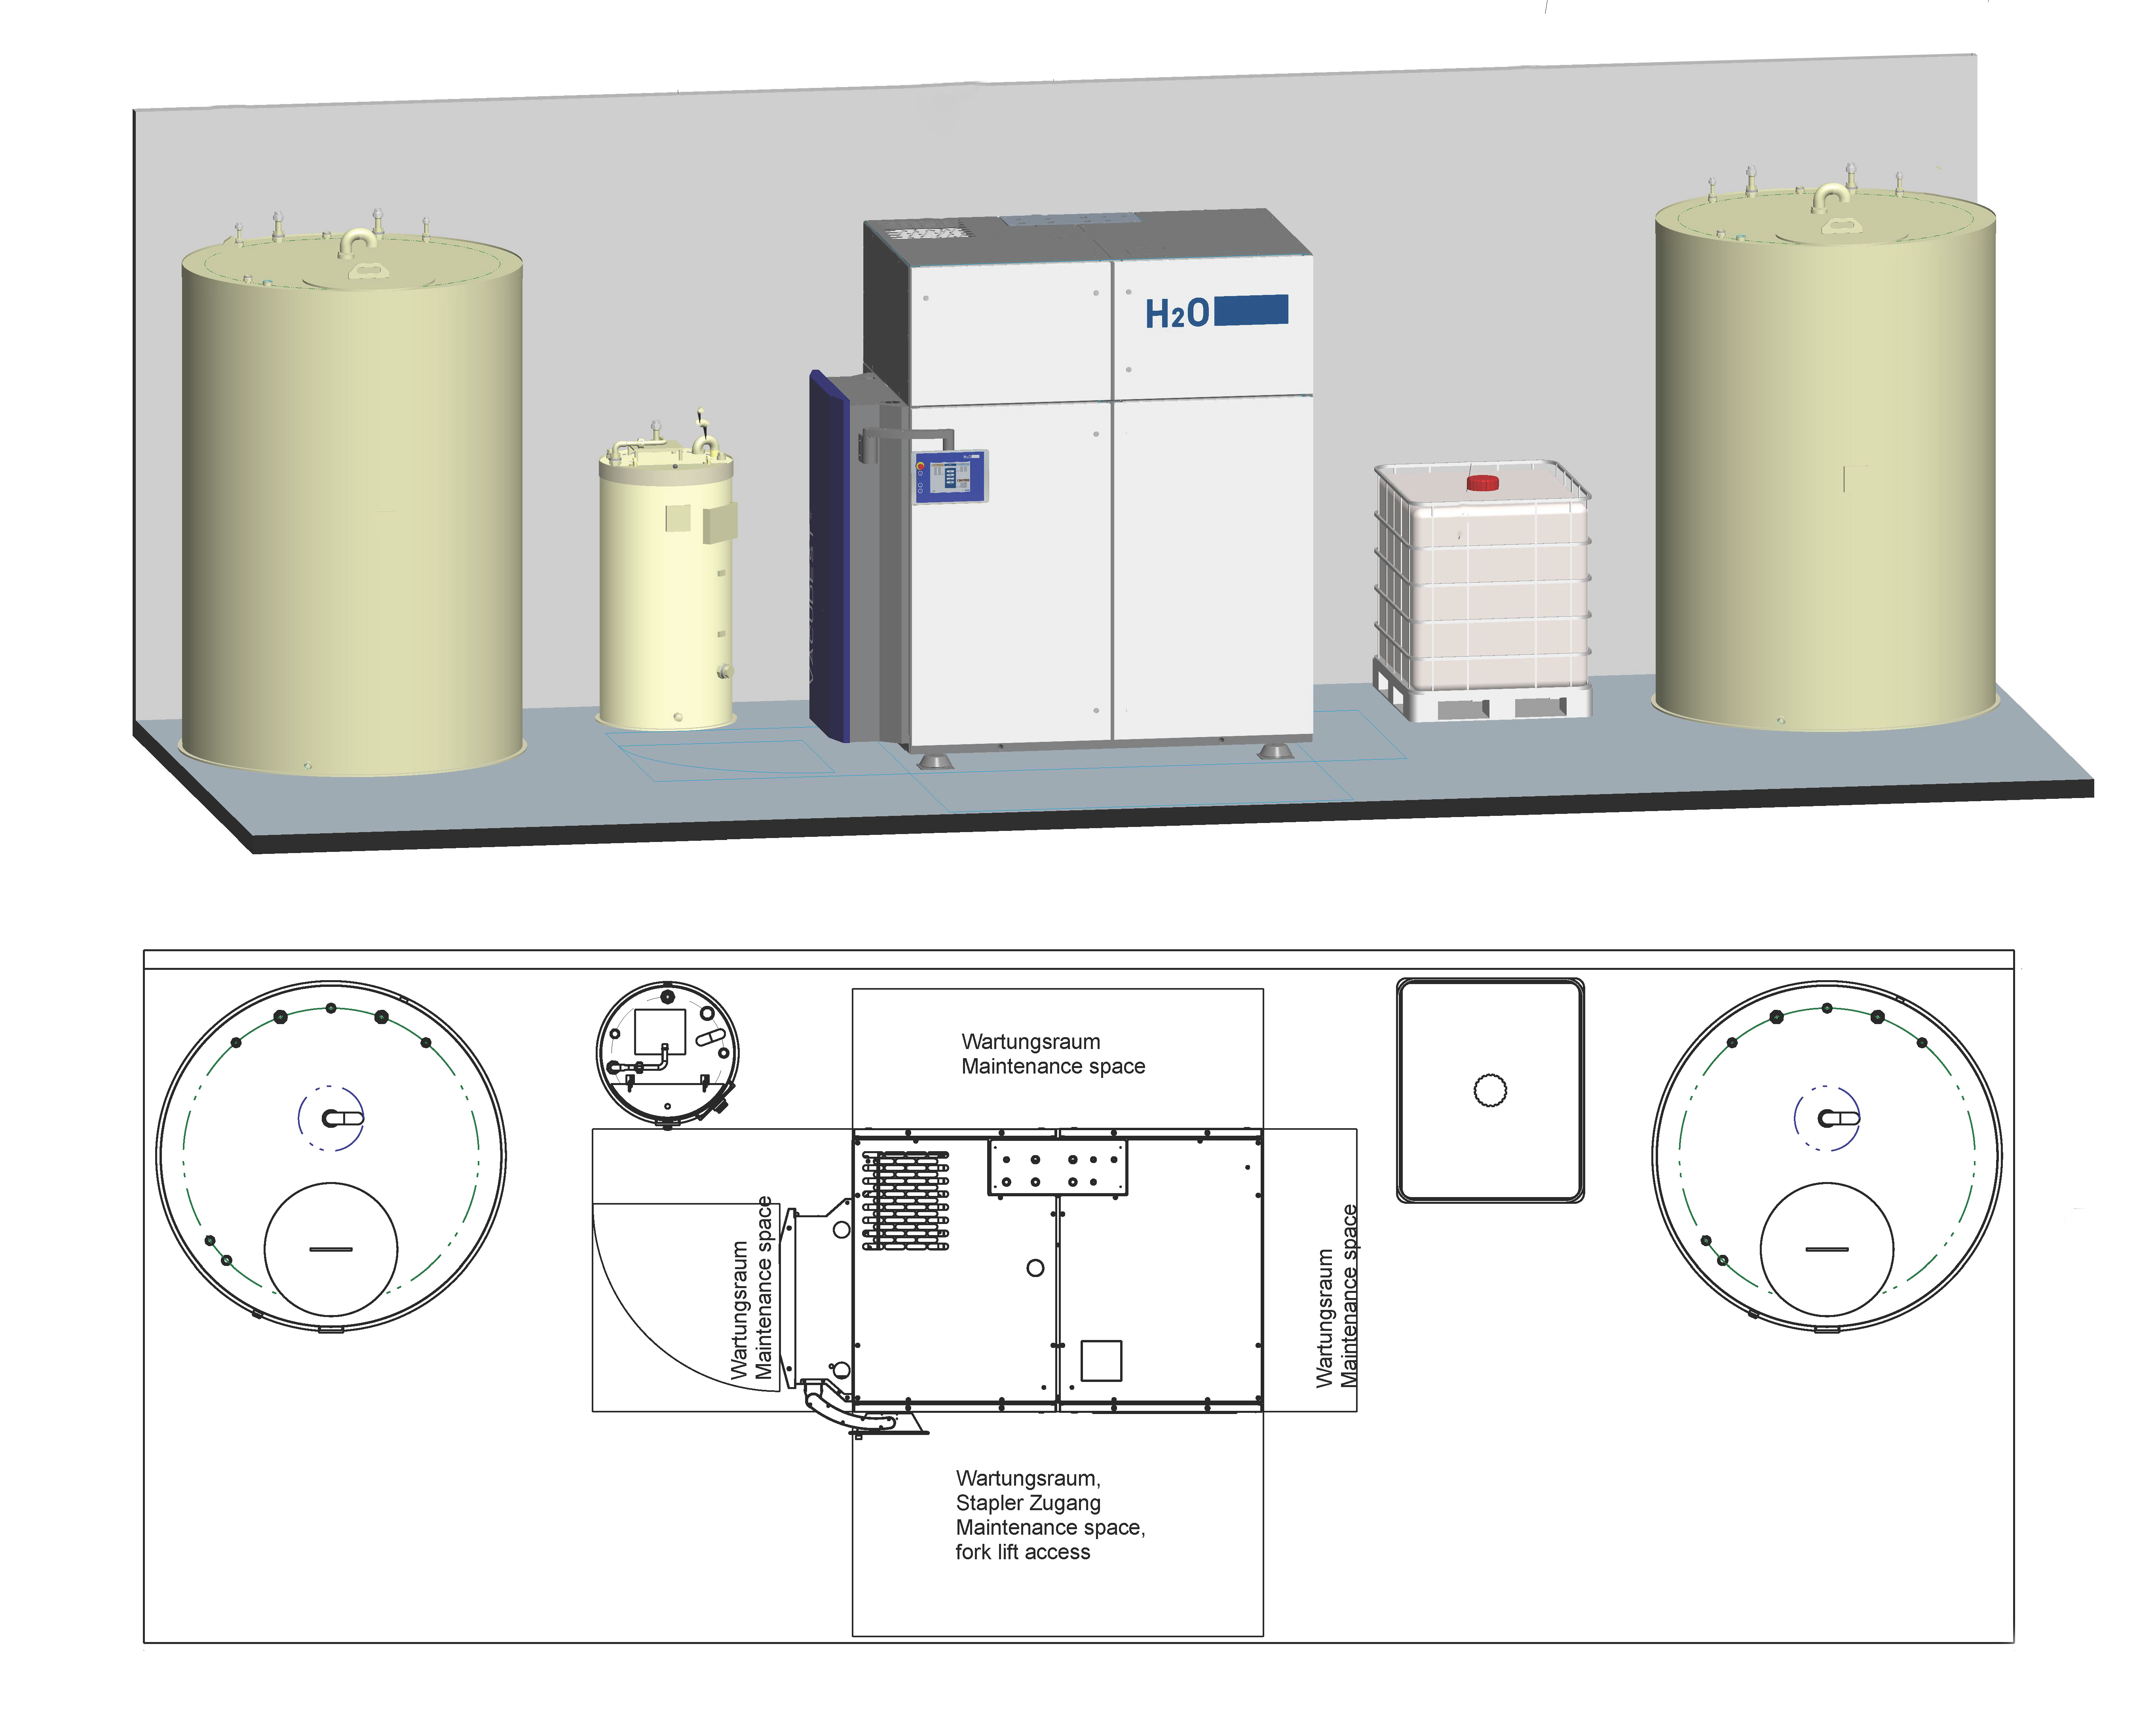 A rendering of a vacuum distillation plant and a corresponding floor plan.